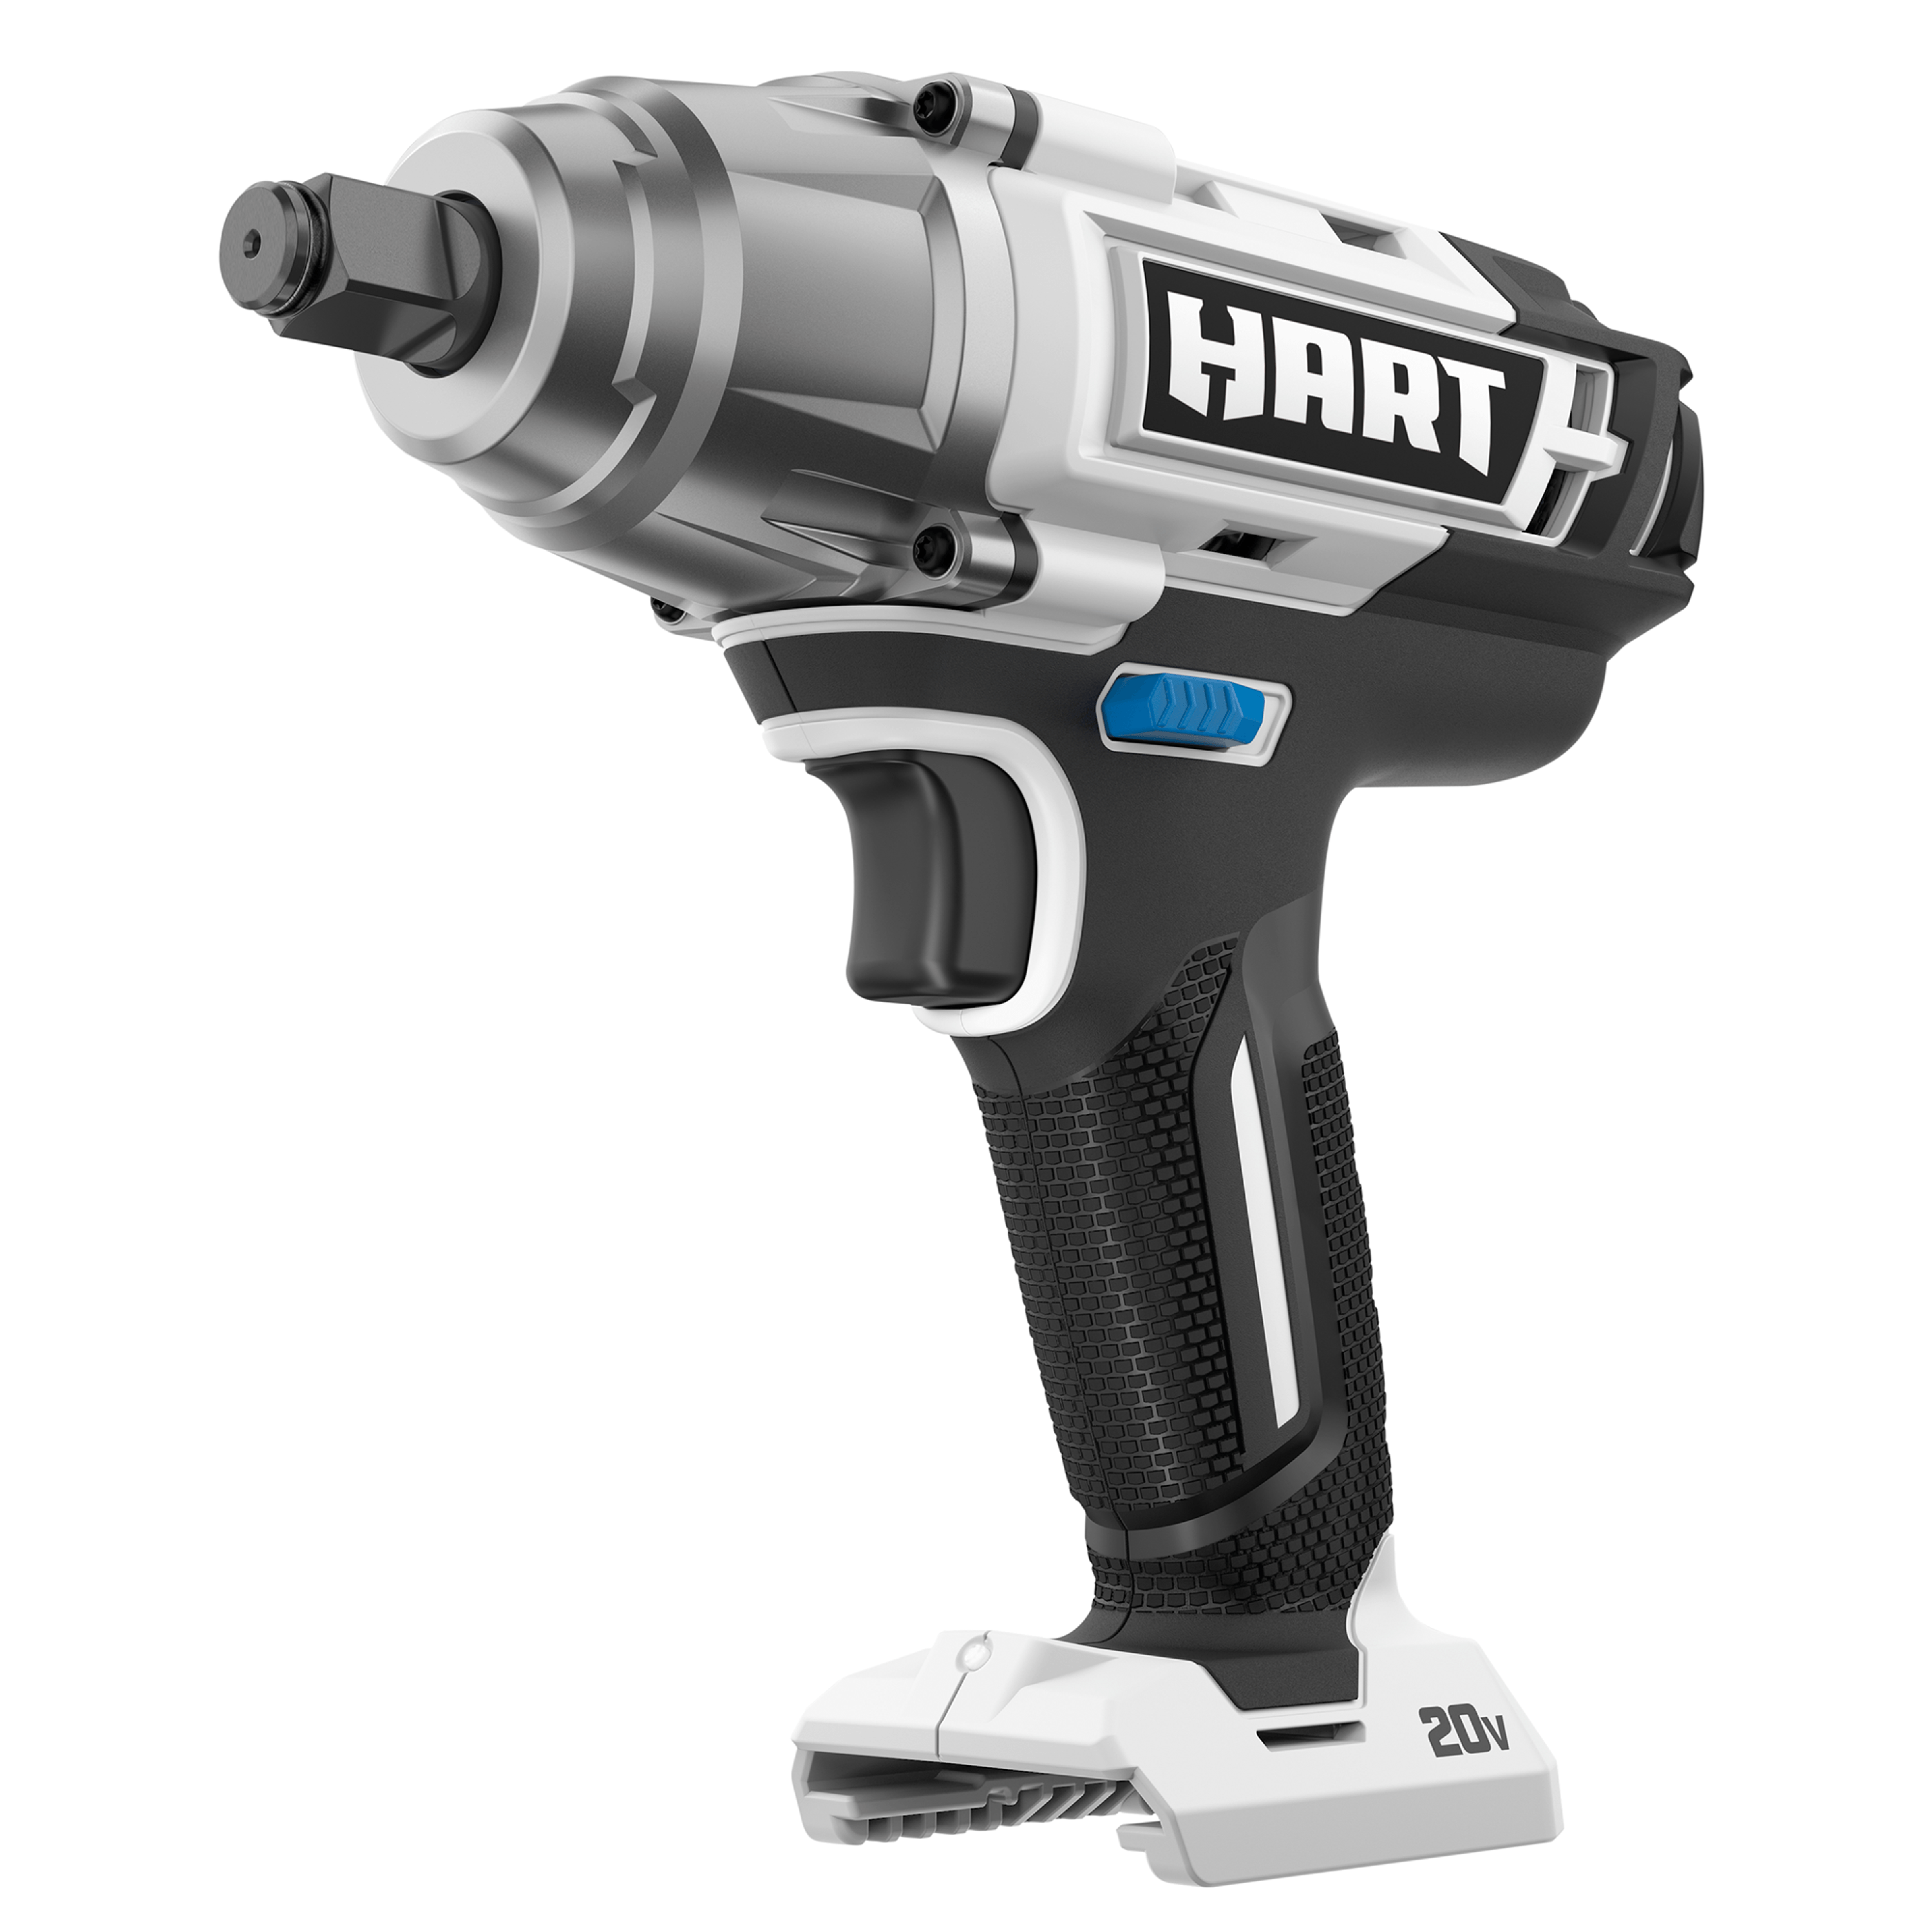 HART 20-Volt 1/2-inch Battery-Powered Impact Wrench (Battery Not Included) - image 1 of 13